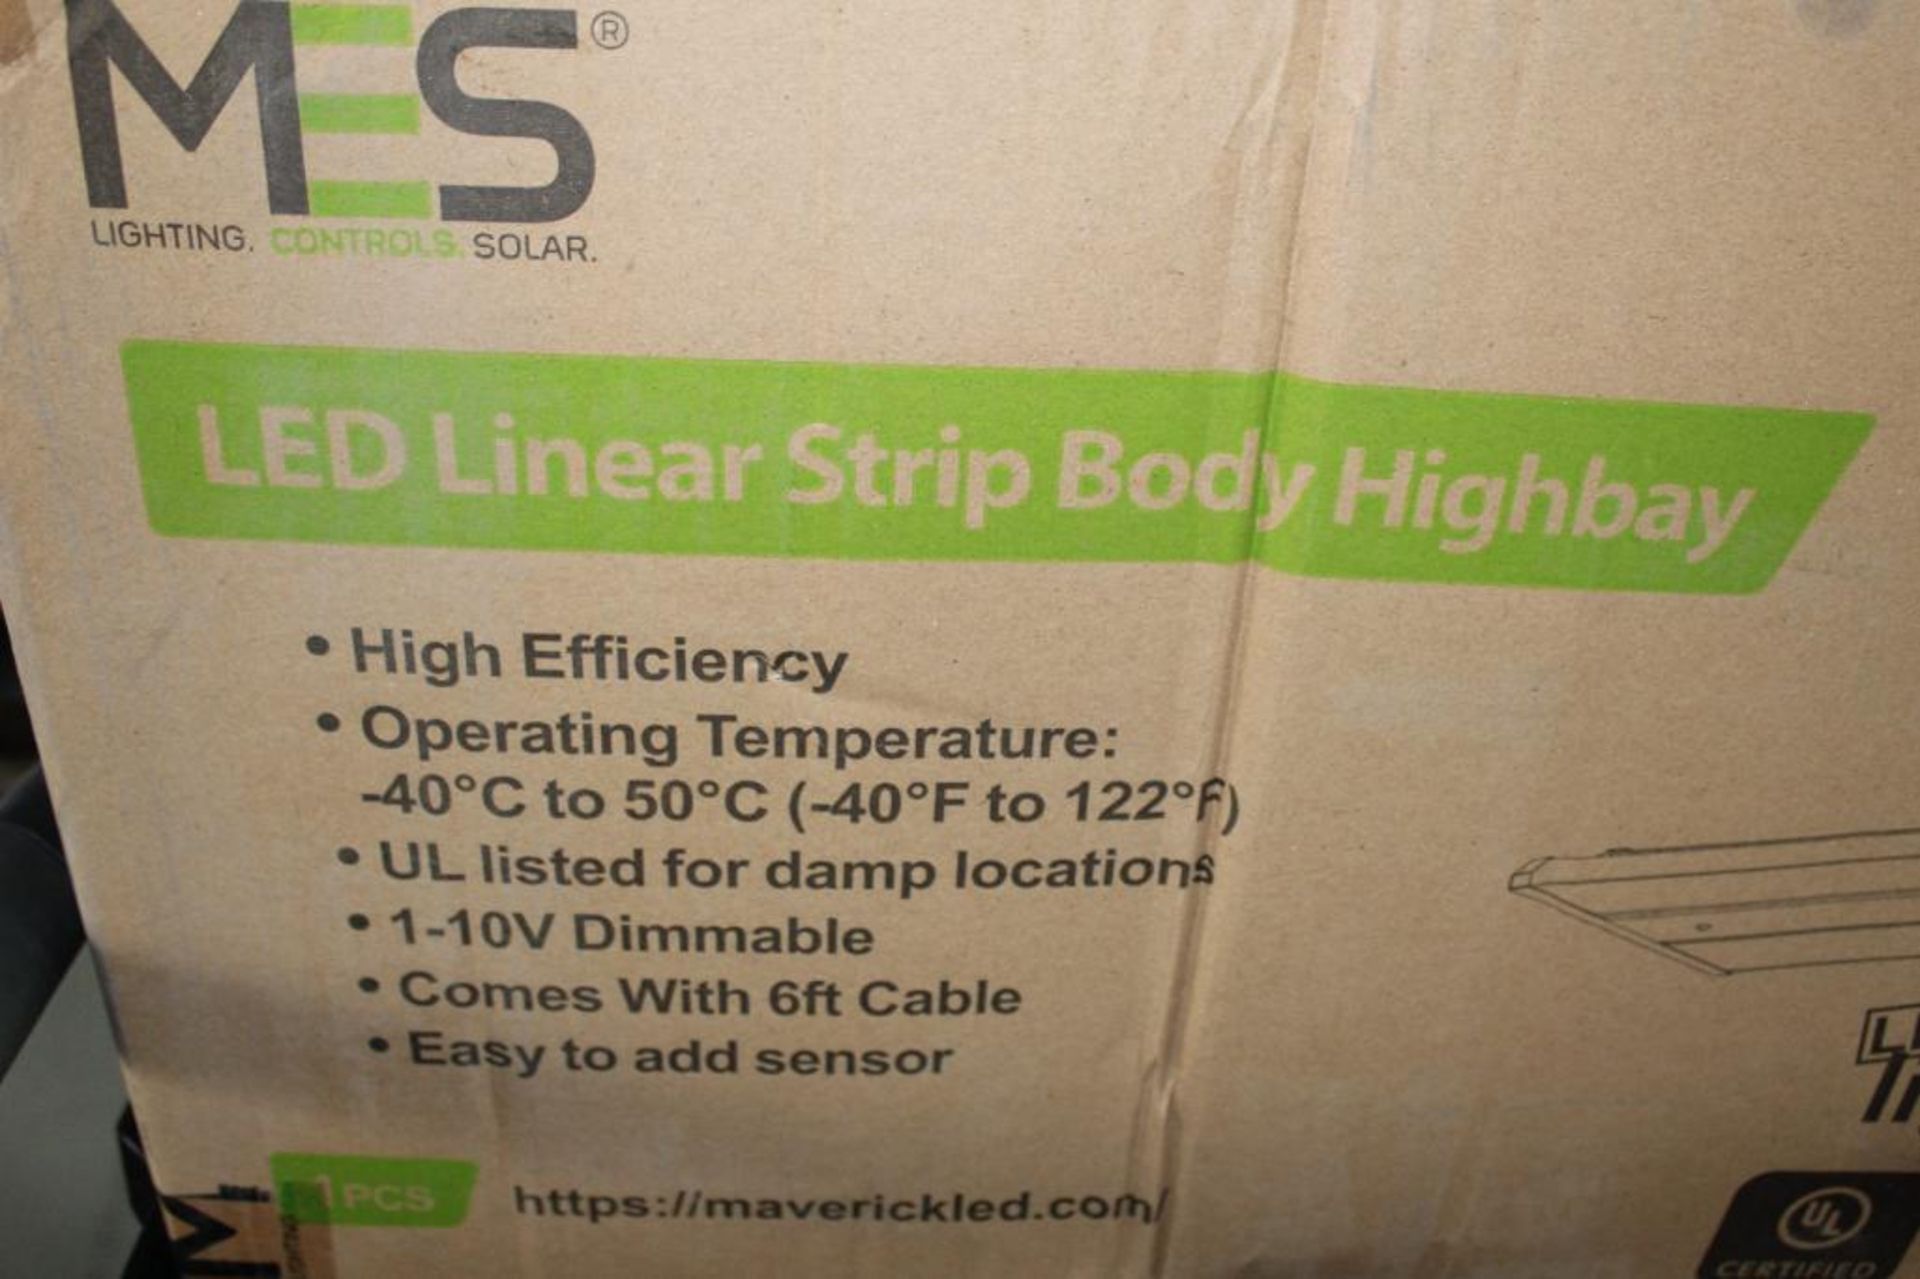 Lot of (1) MES LED Linear Strip Body HighBay - Image 3 of 6